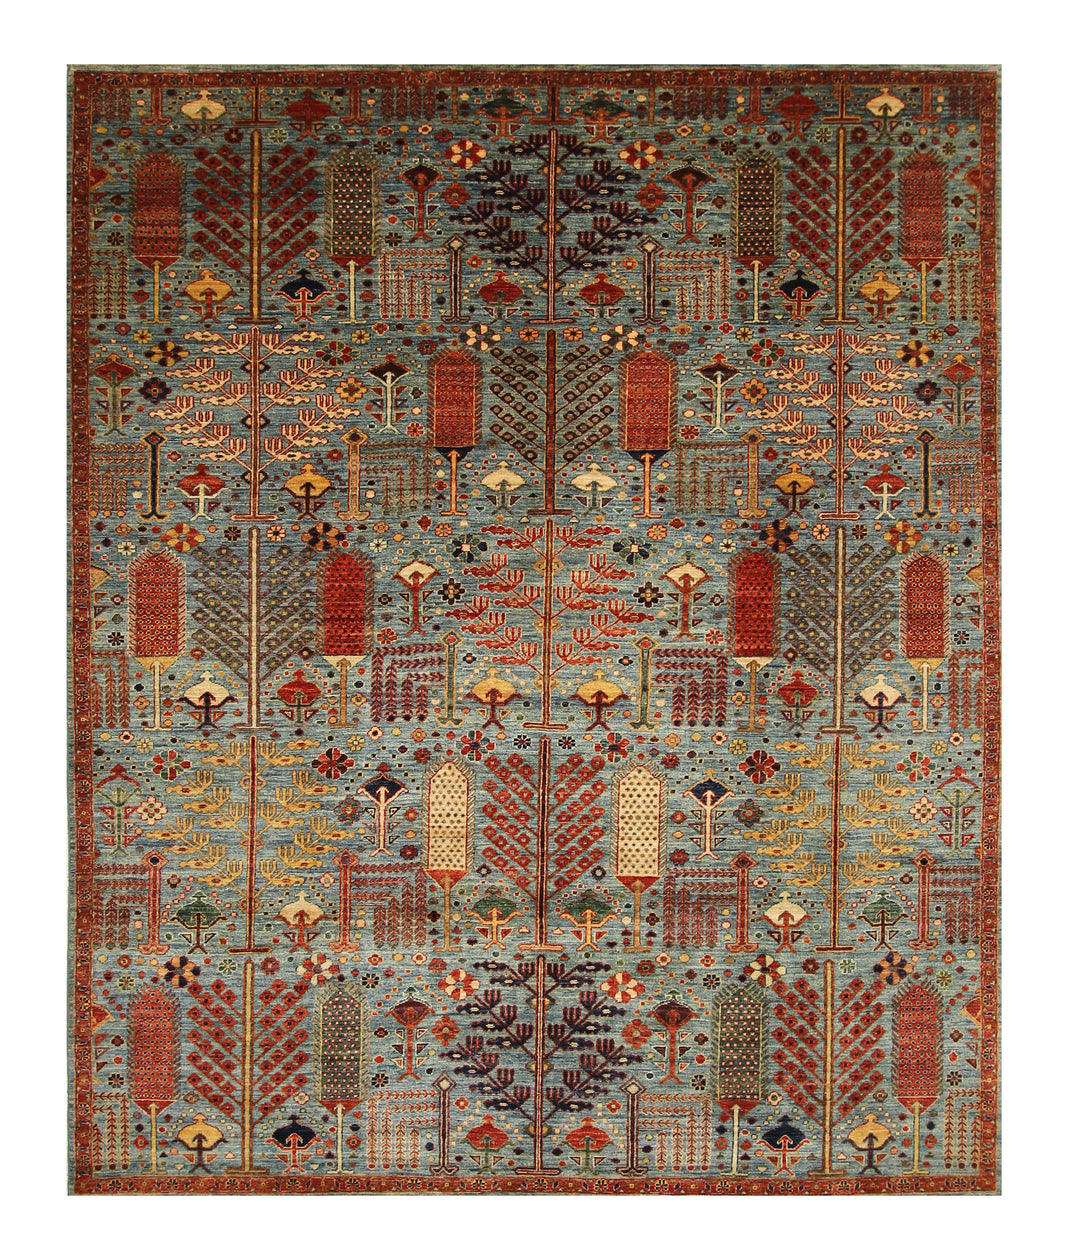 SOLD 8x10 Blue Tribal Bakhshaish Afghan Hand knotted Gabbeh Tree of Life Rug